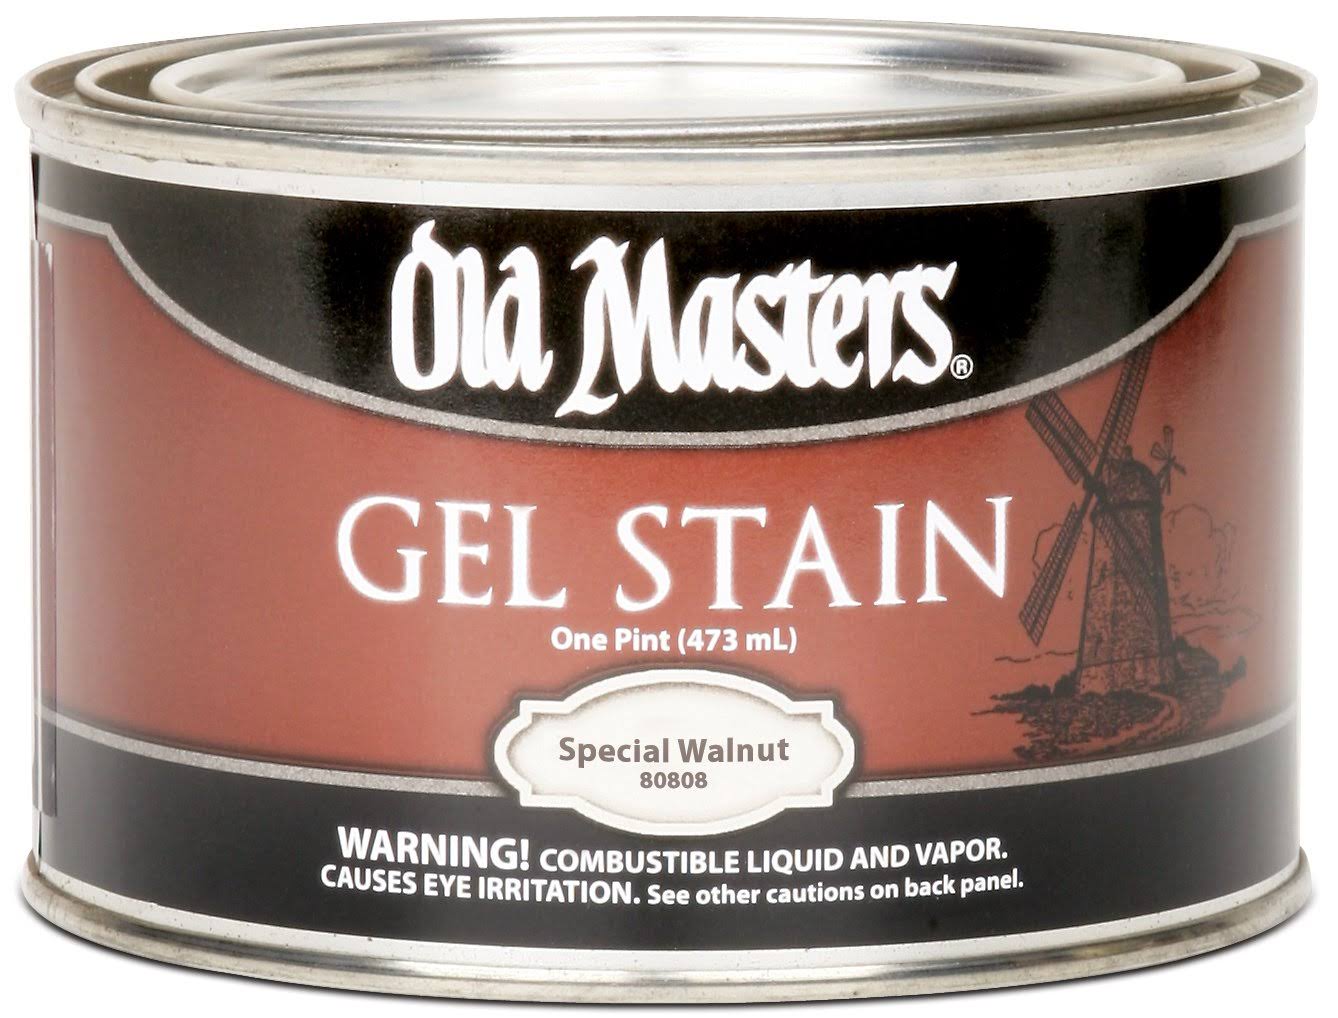 Old Masters 80808 Gel Stain, Special Walnut, Liquid, 1 pt, Can